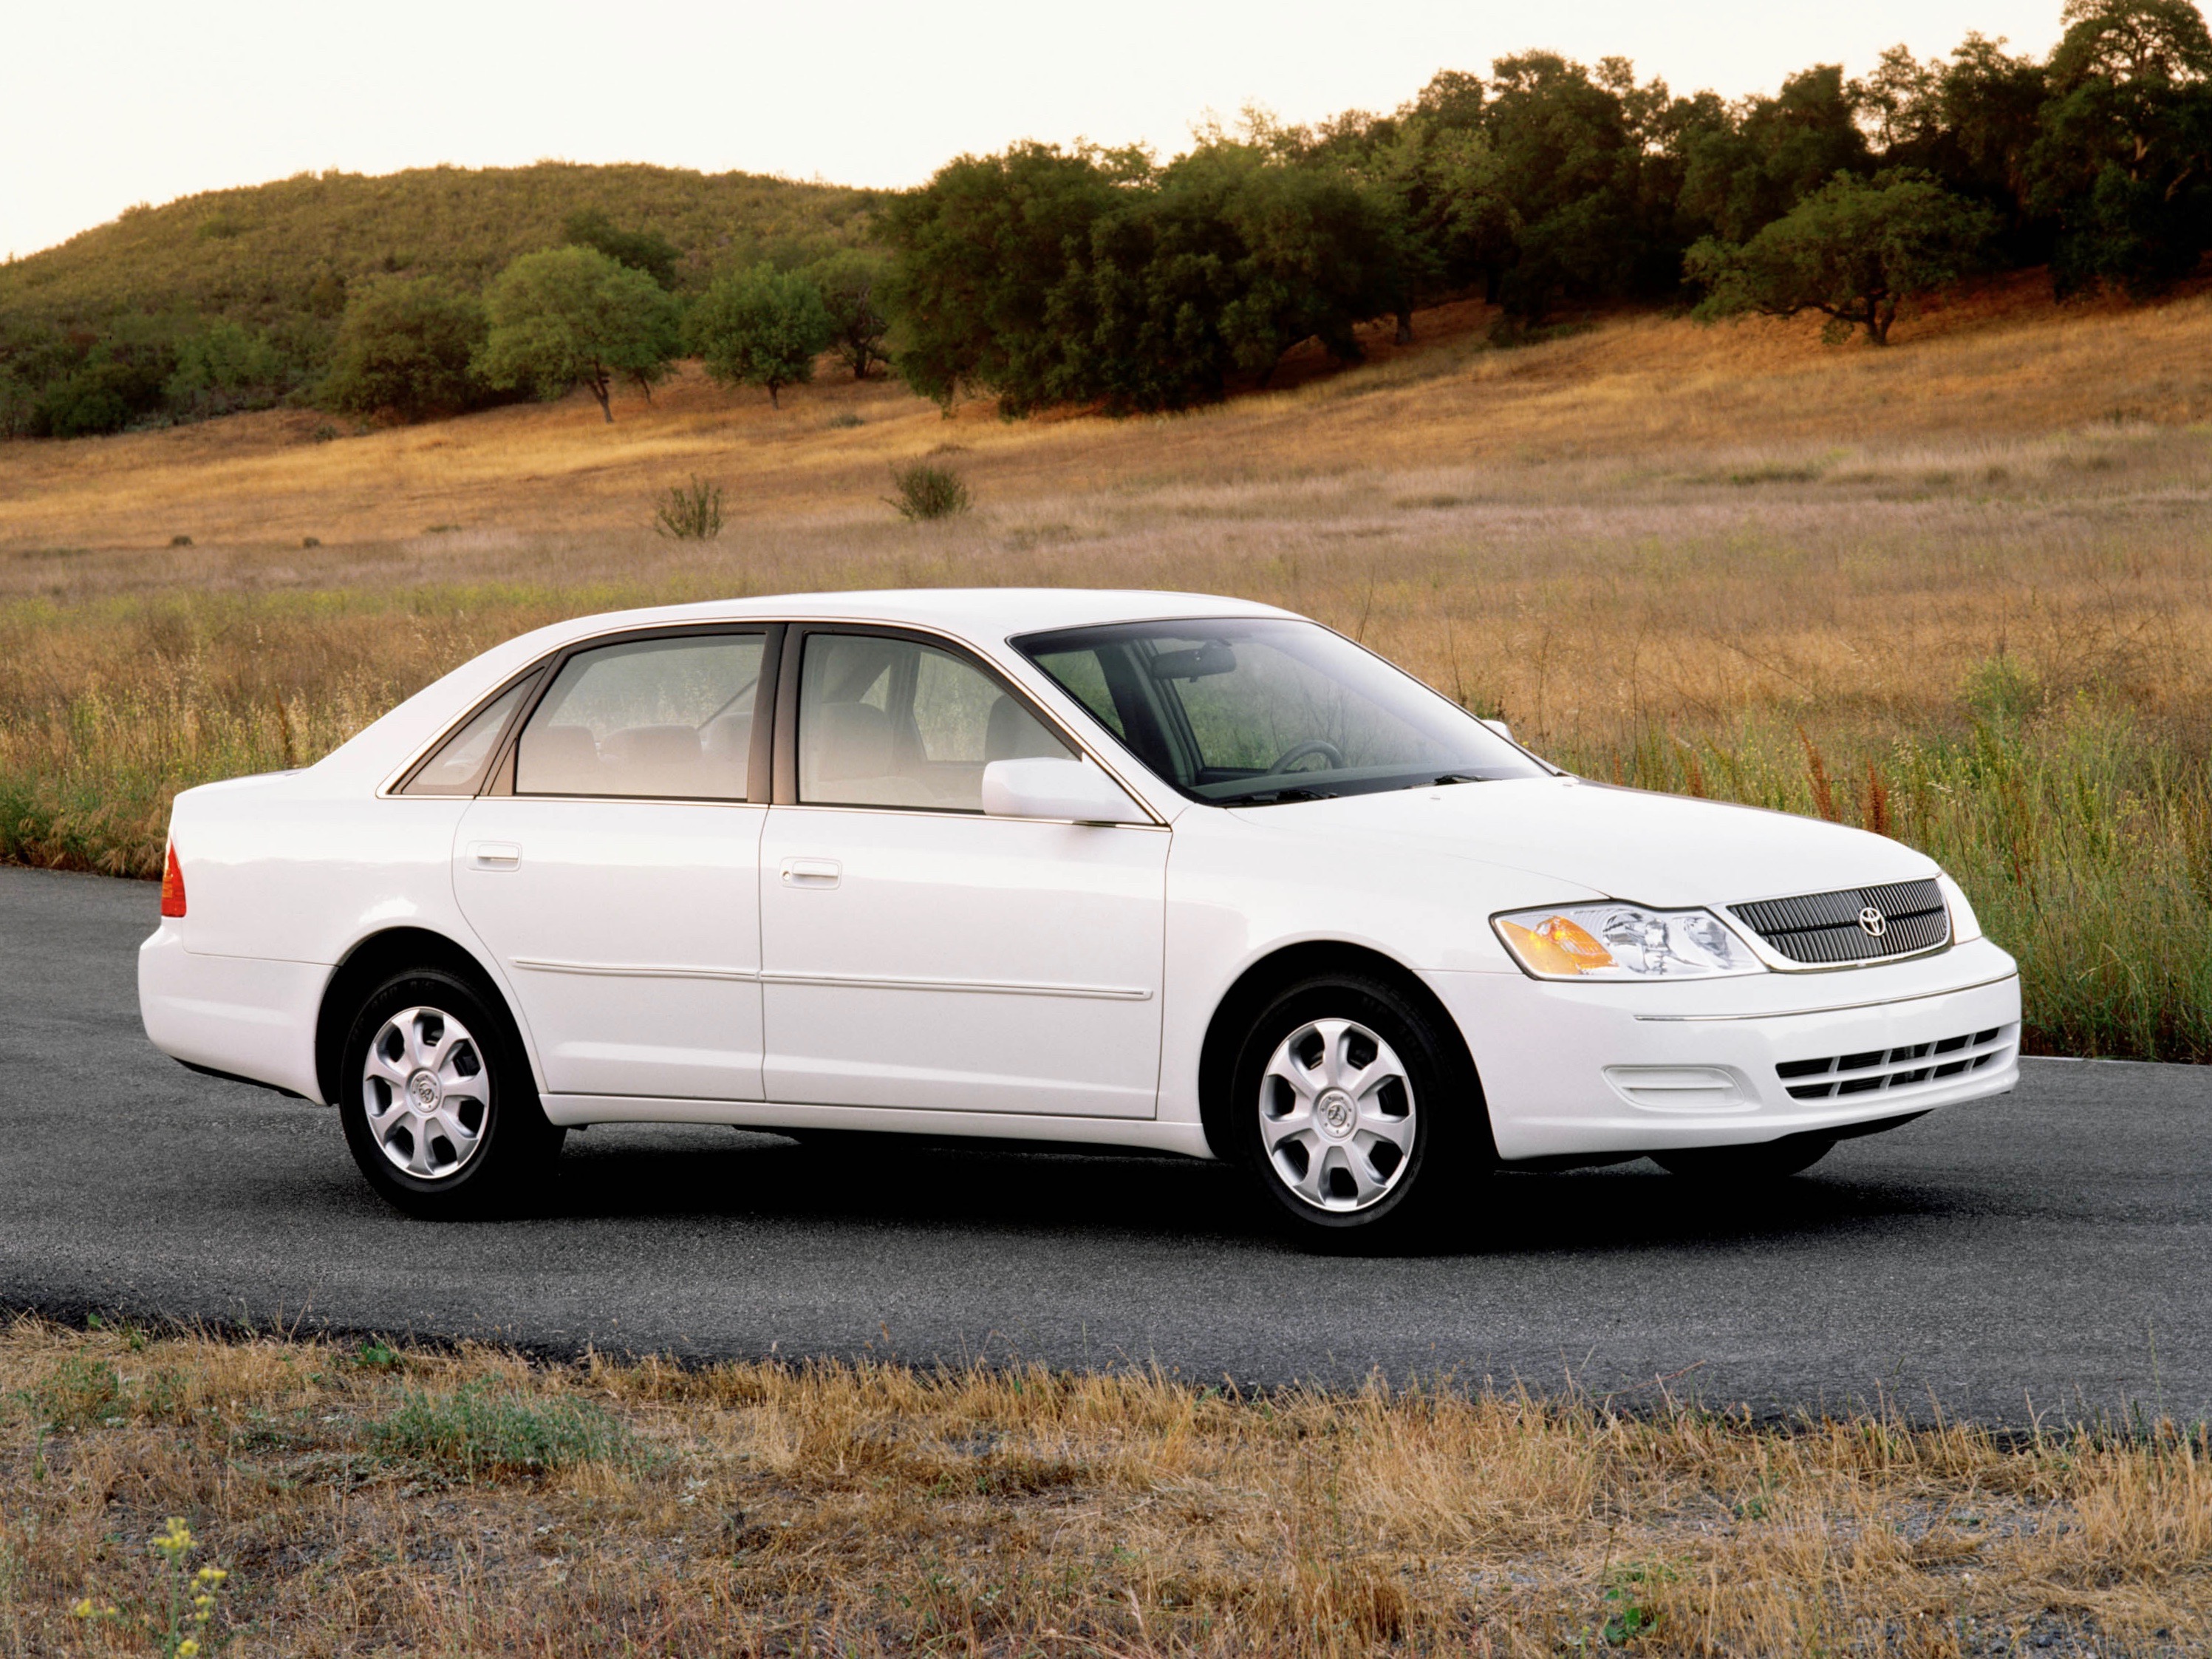 2003 Toyota Avalon : Latest Prices, Reviews, Specs, Photos and